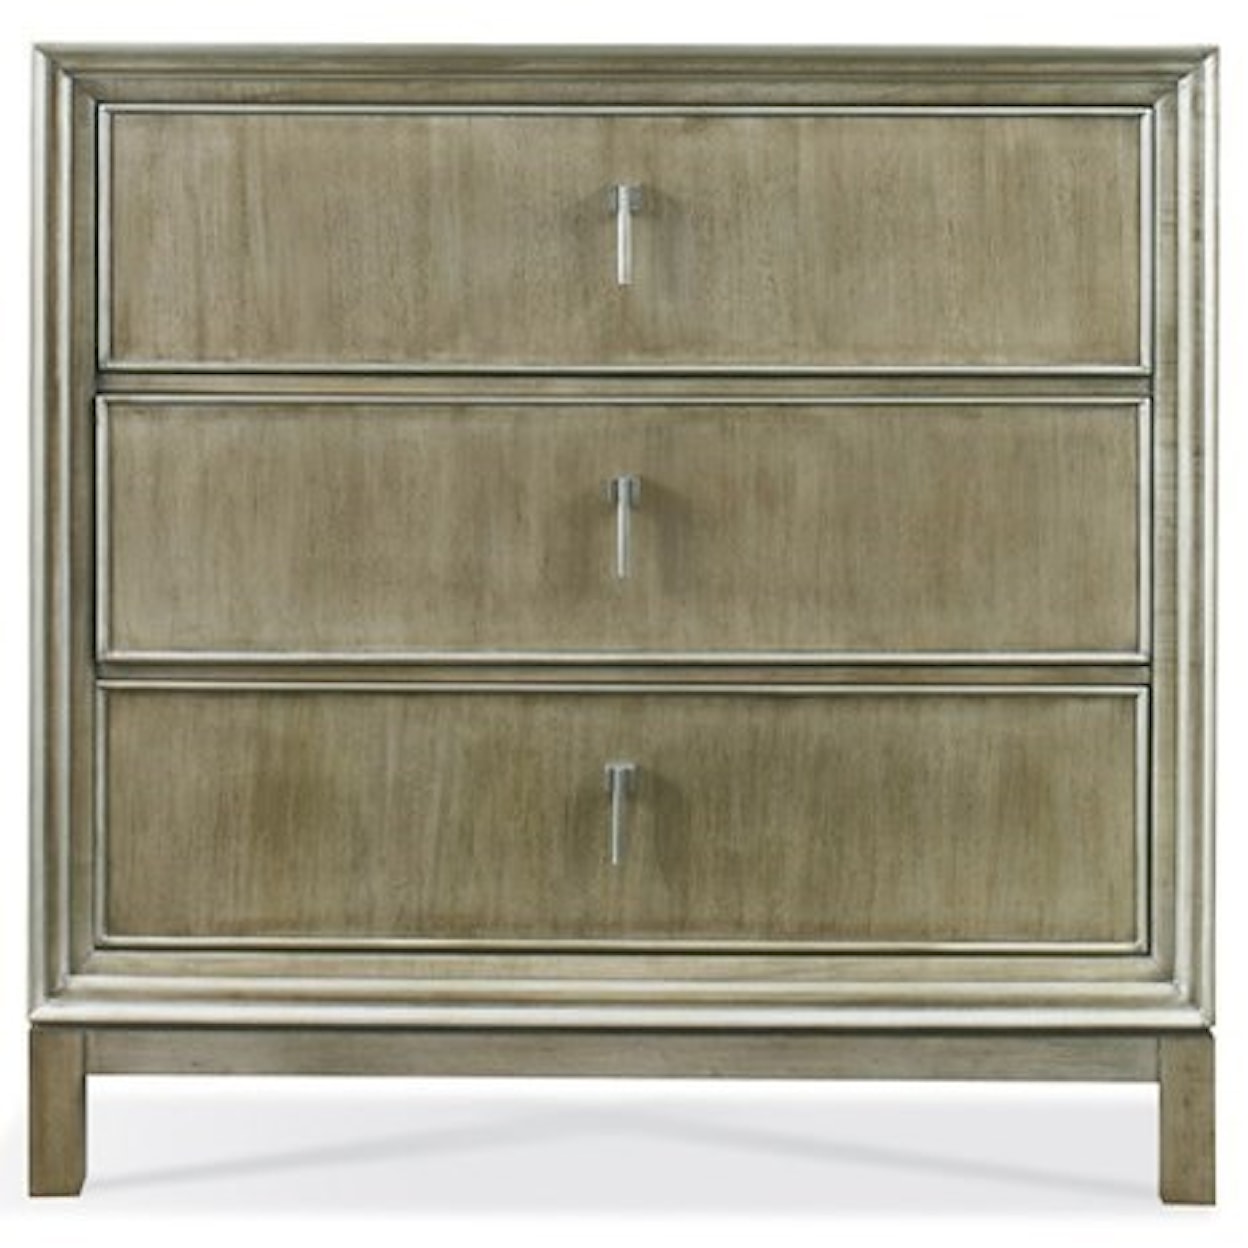 Hickory White Cabinet Shop Alex Drawer Chest and Base